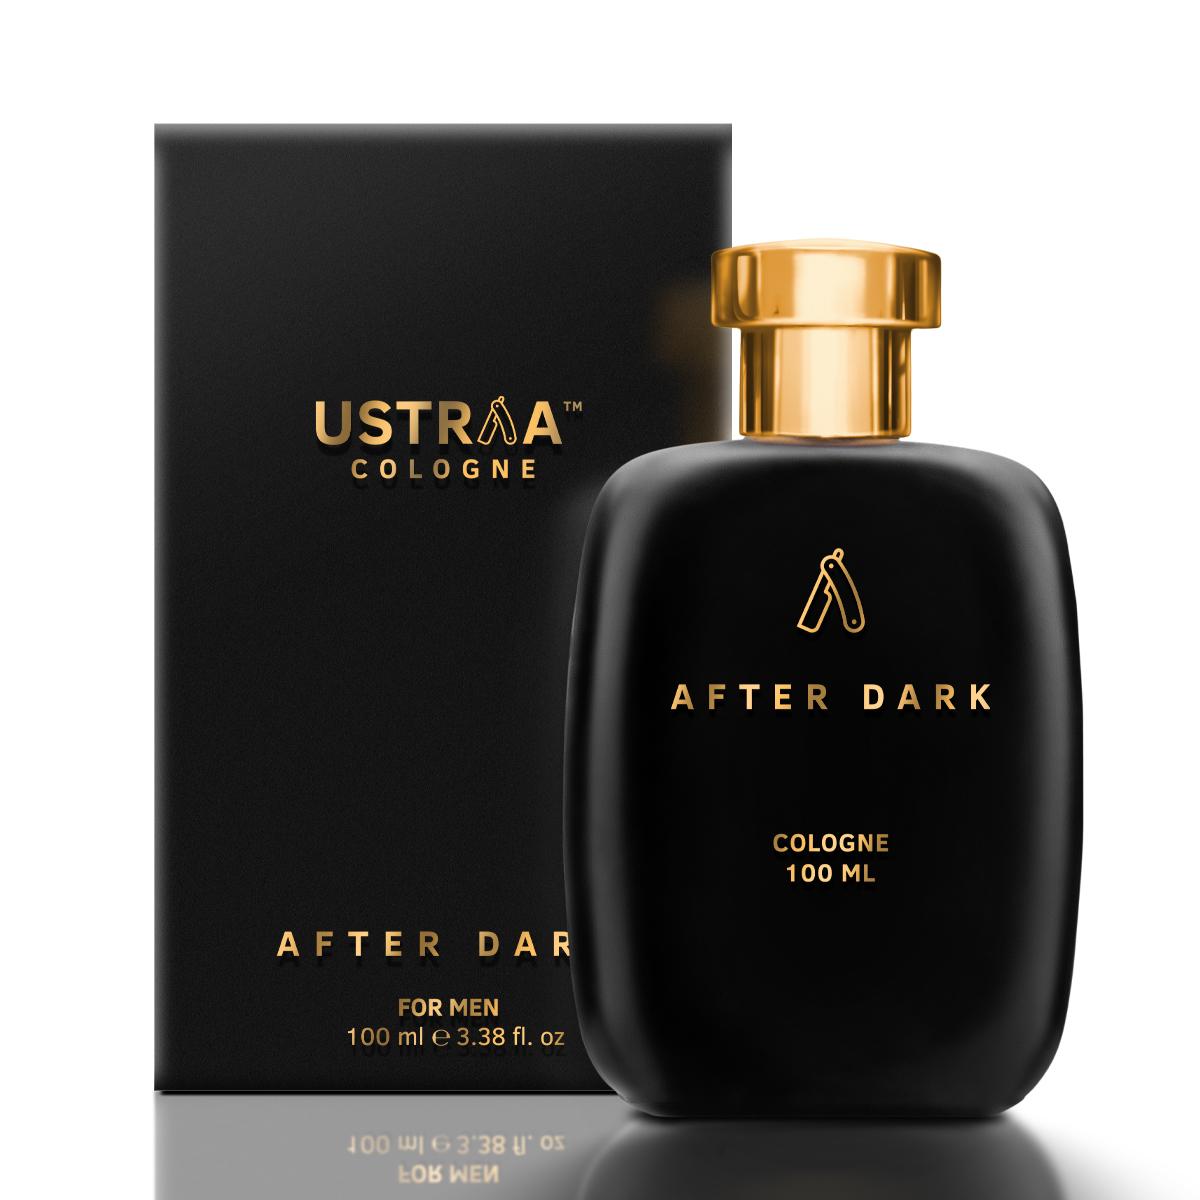 Ustraa After Dark Men's Cologne 100 ml - A Bold and Intense Long-Lasting Perfume for Men